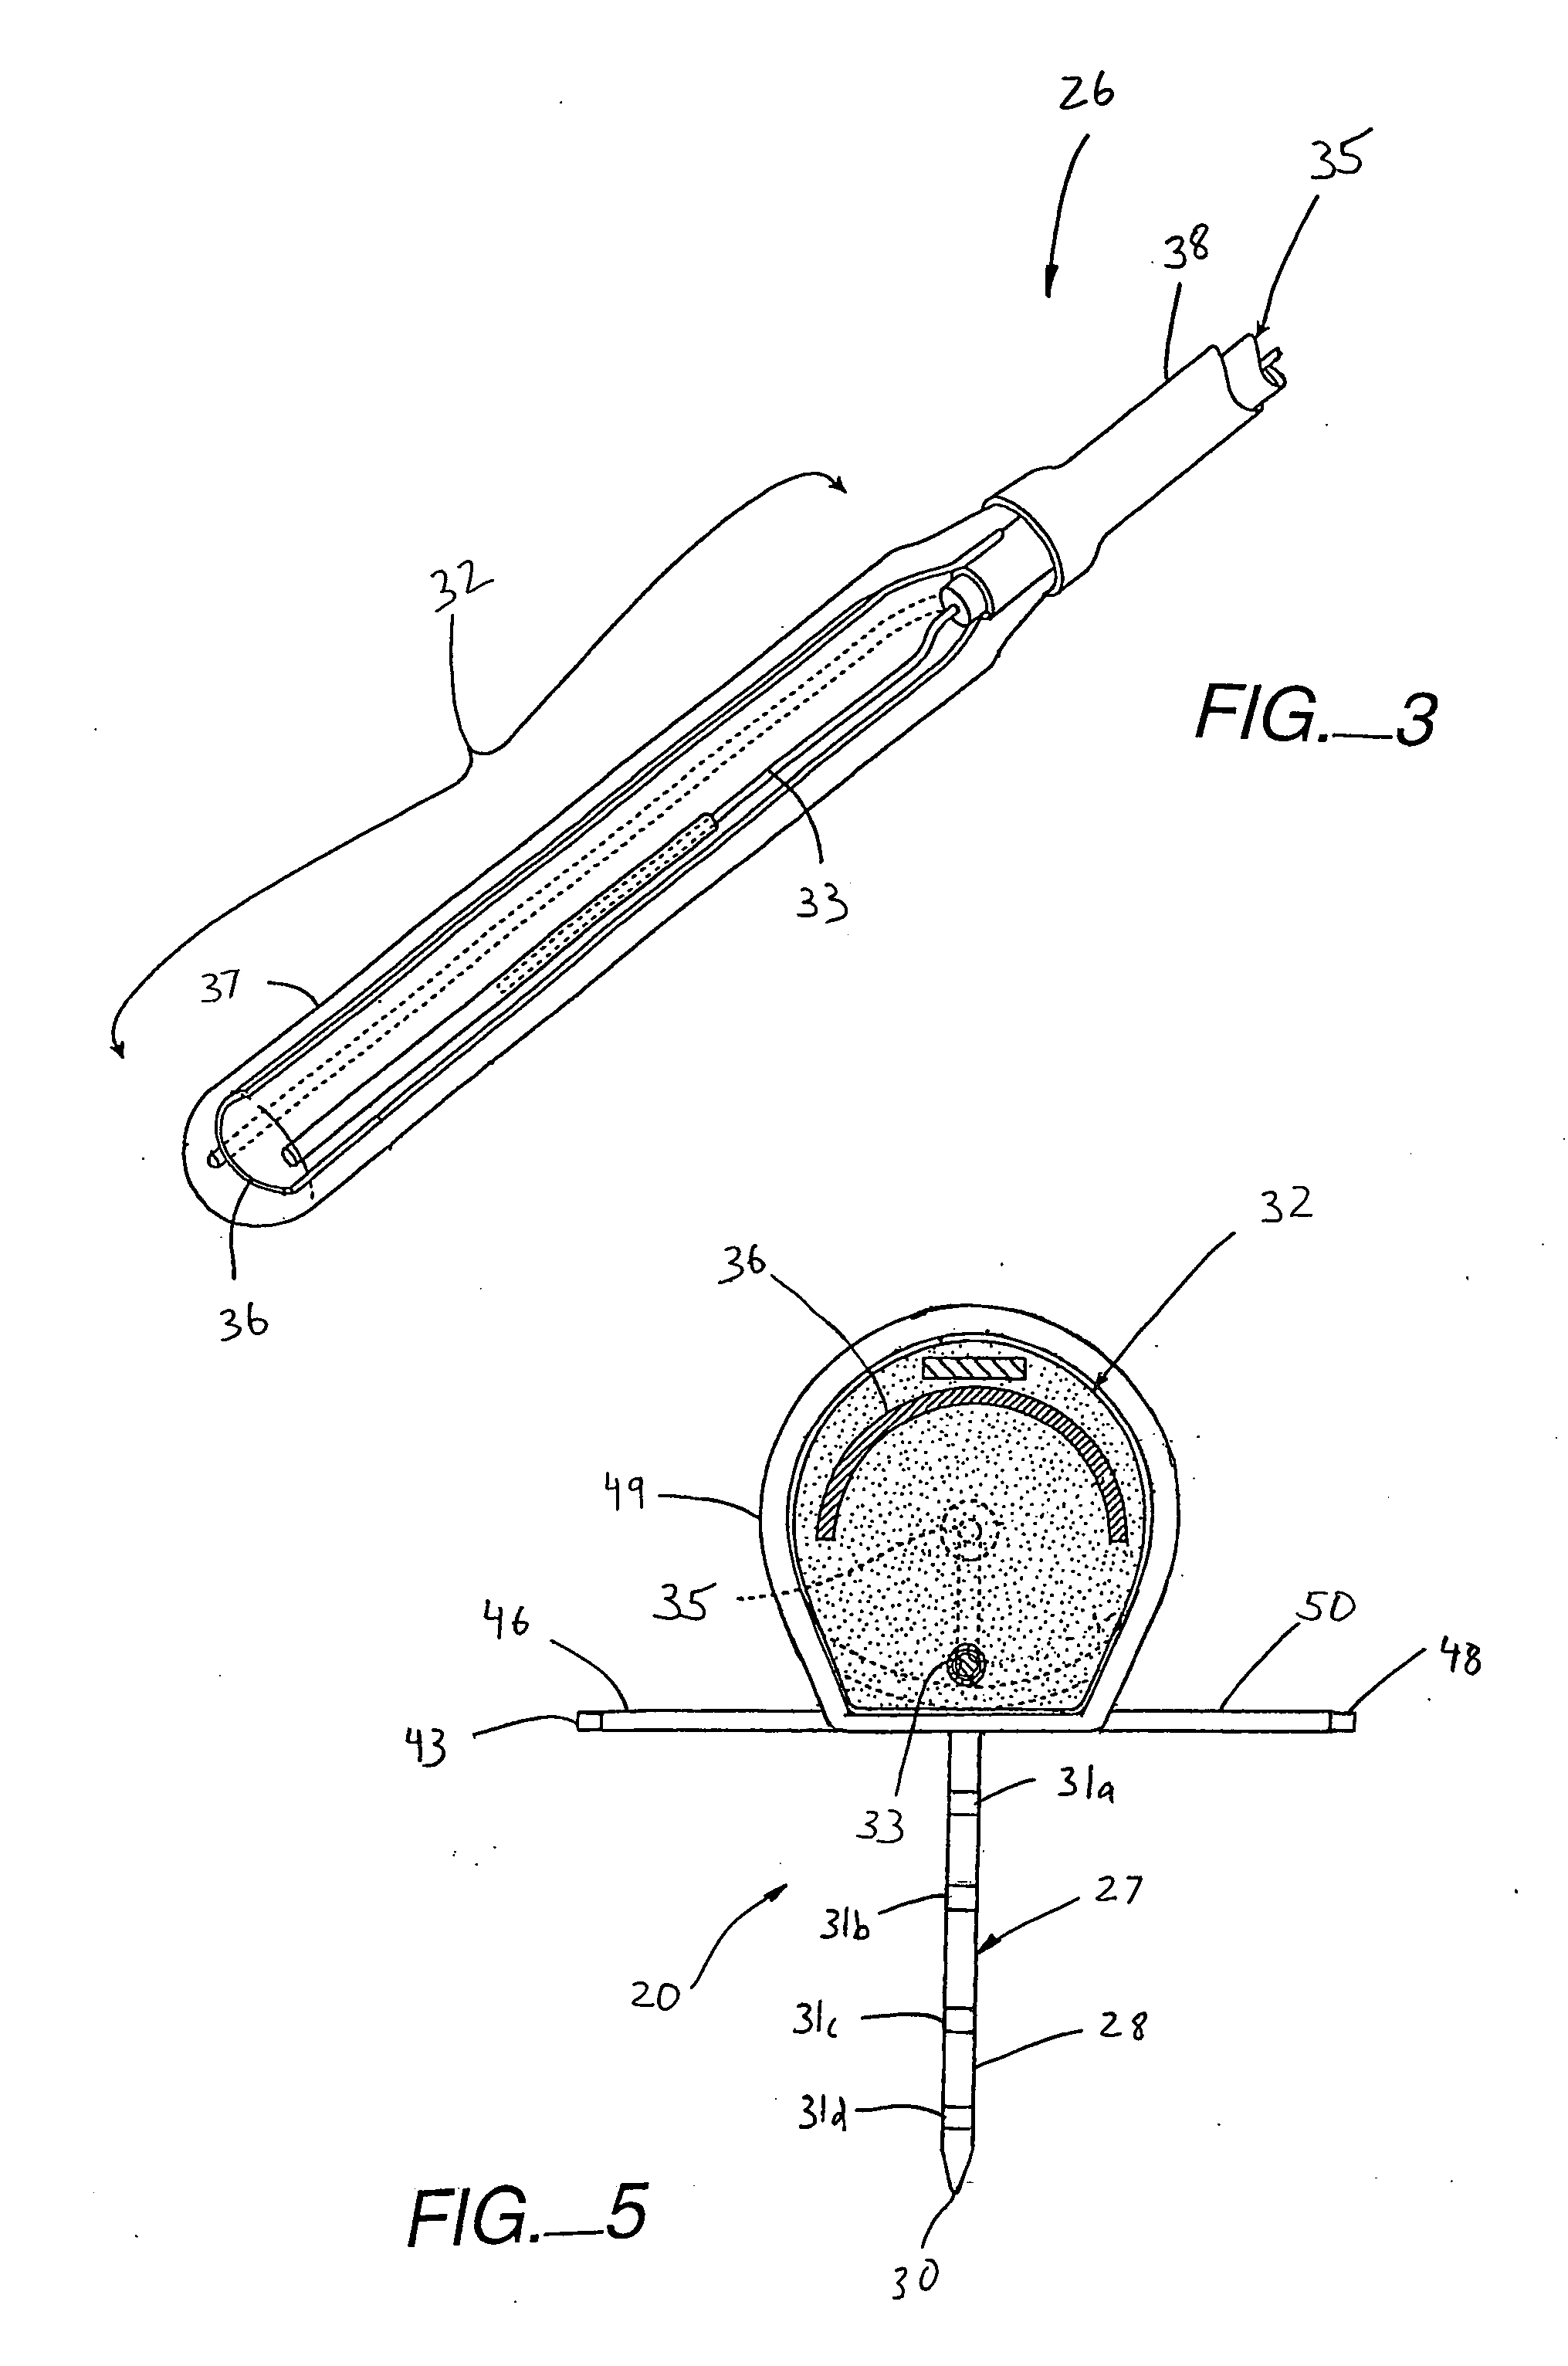 Apparatus and method for assessing tissue ablation transmurality